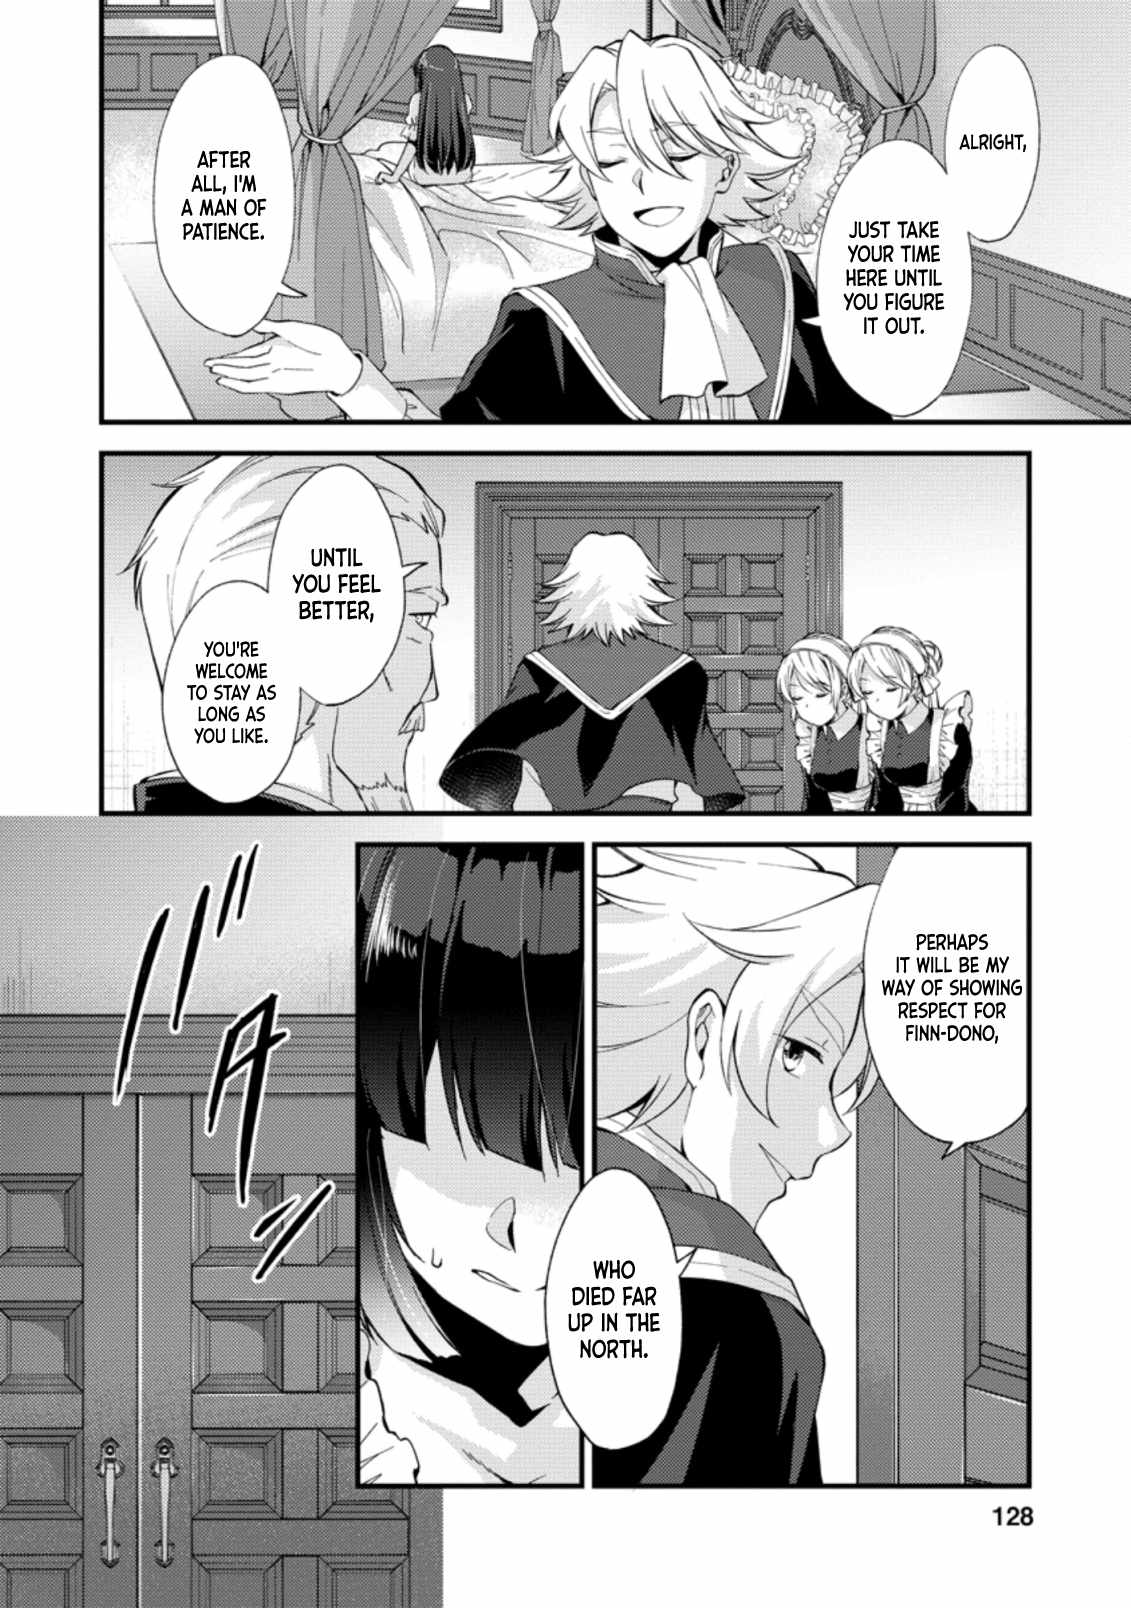 A Sword Master Childhood Friend Power Harassed Me Harshly, So I Broke Off Our Relationship And Make A Fresh Start At The Frontier As A Magic Swordsman. - 15 page 7-3afec5fc